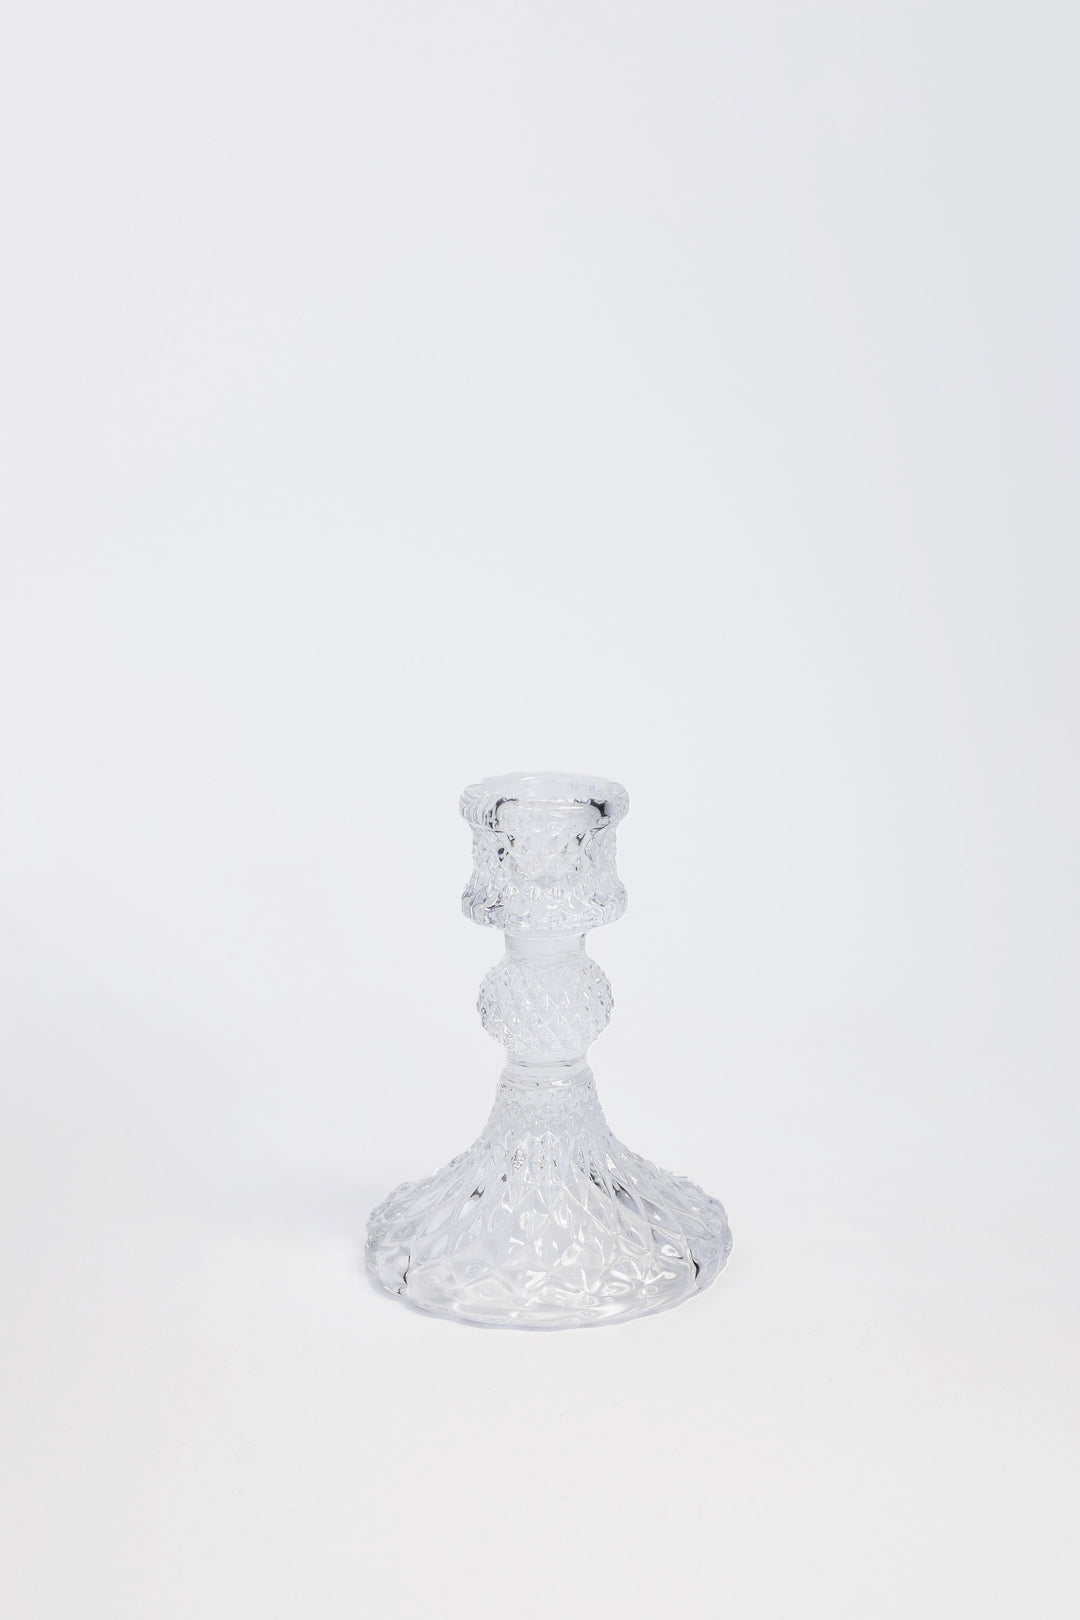 Glass Harlequin Candlestick / Clear - Domestic Science Home